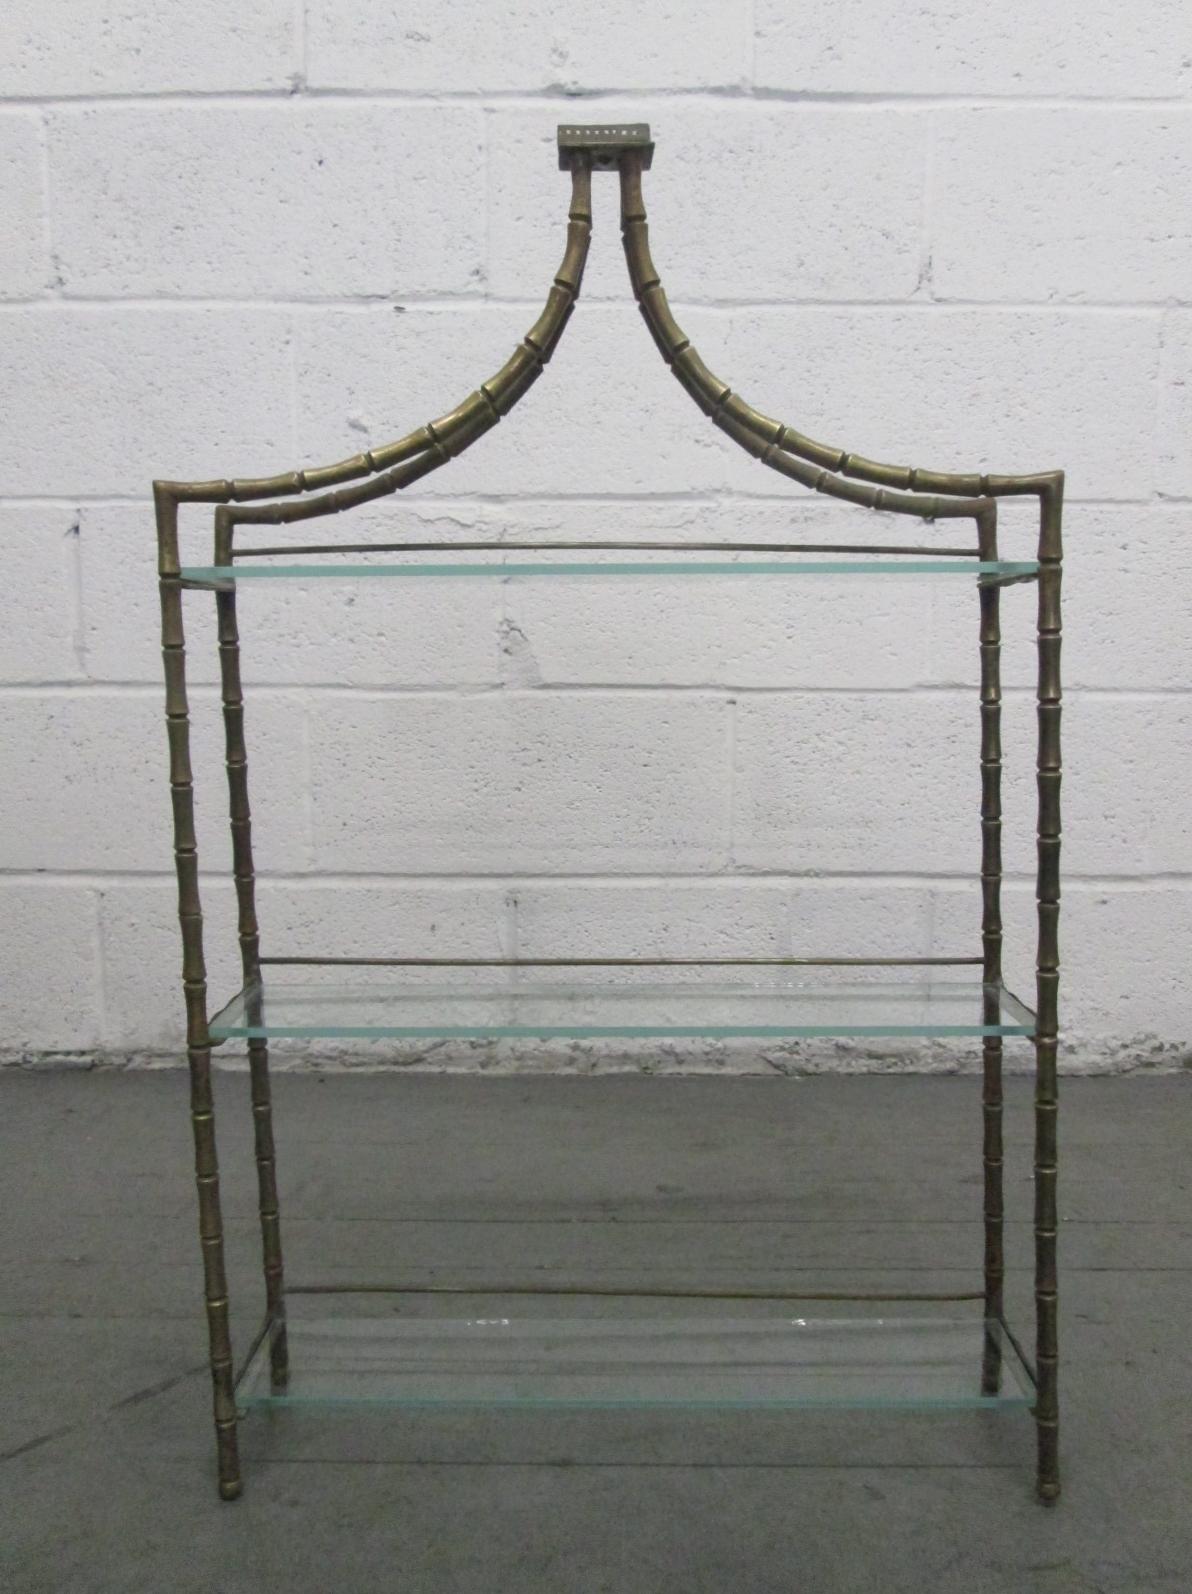 Faux bamboo bronze shelf in the style of Maison Baguès. Has three glass shelves and a nice greenish patina to the bronze.